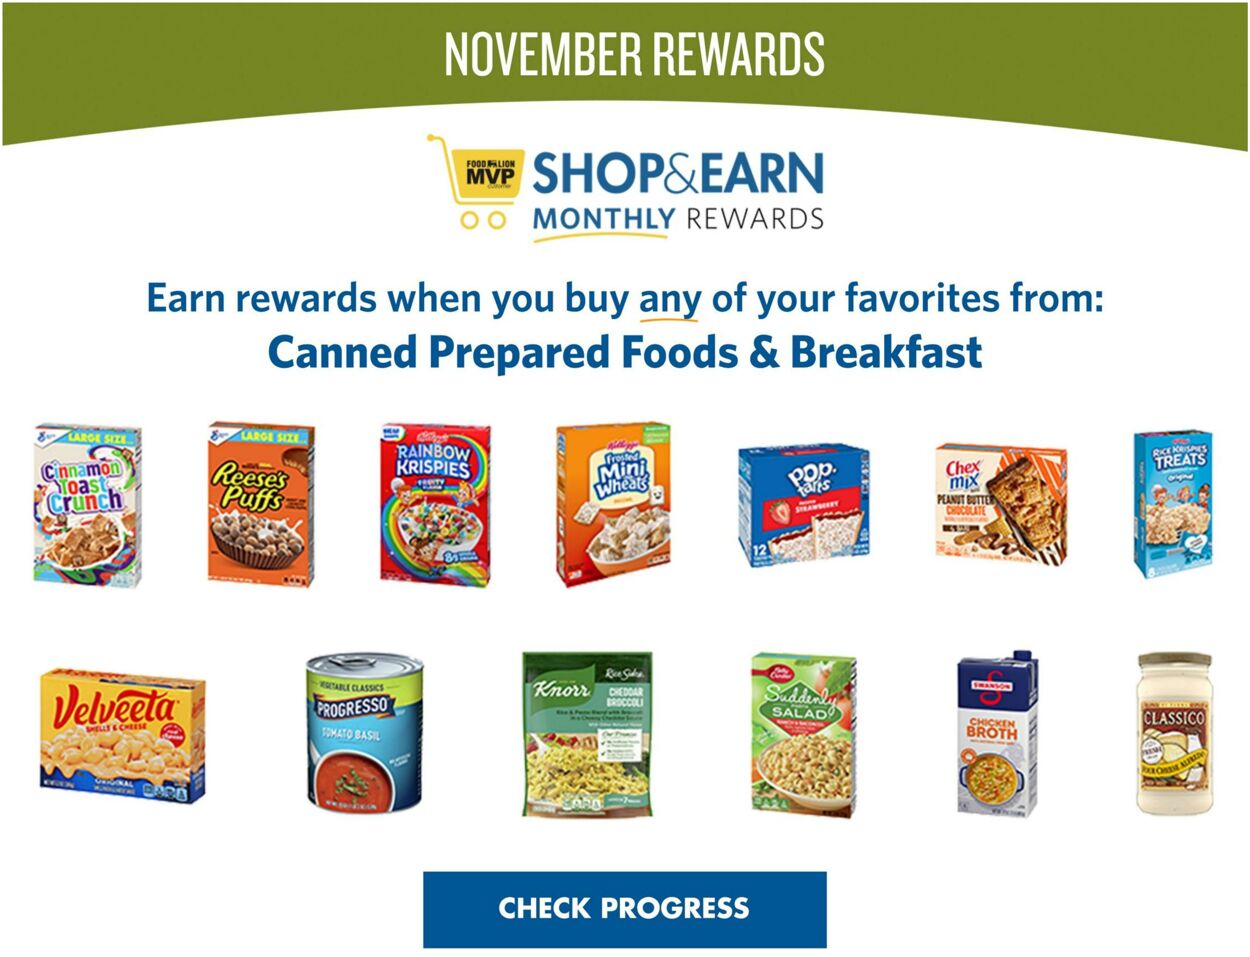 Food Lion Ad from 11/08/2023